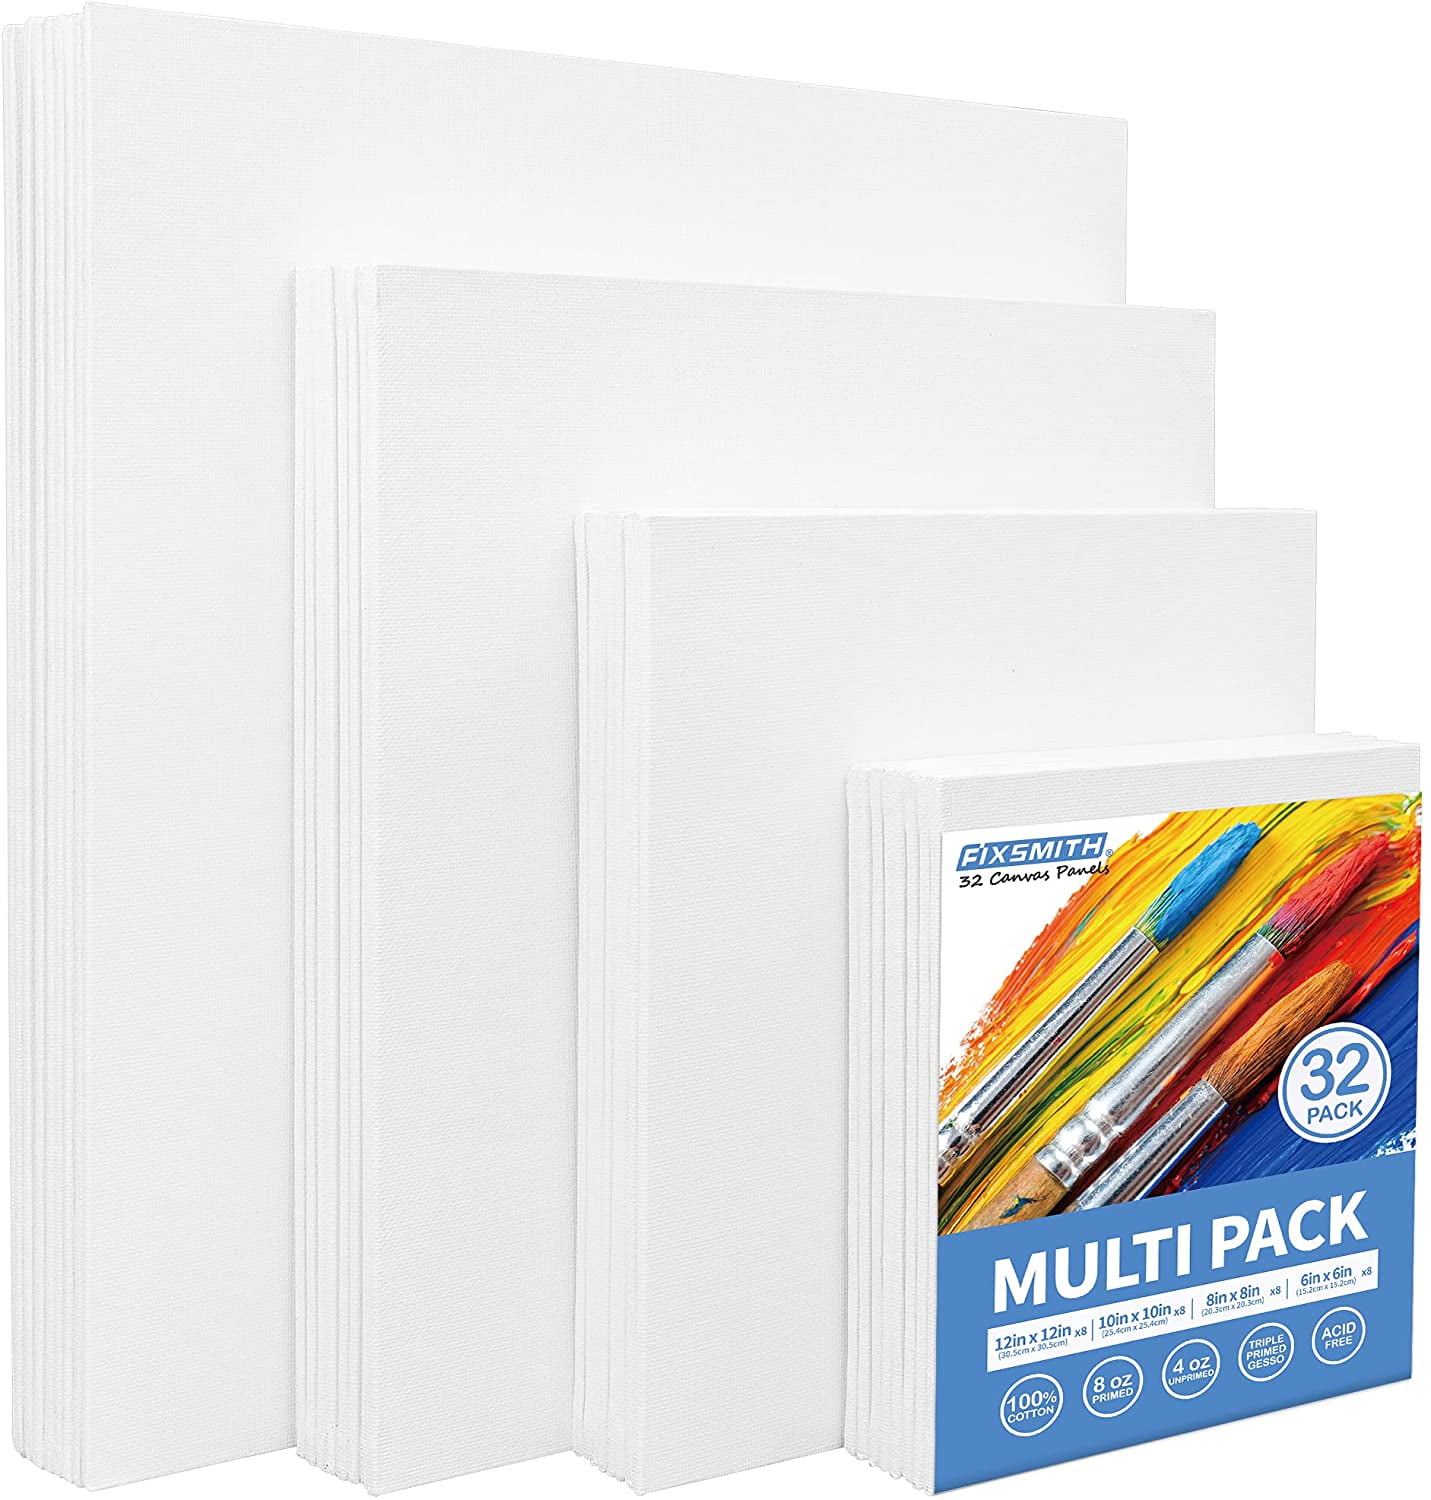 FIXSMITH Painting Canvas Panels Multi Pack- 6x6,8x8,10x10,12x12 (8 of Each),32 Pack,100% Cotton,Primed White Canvases,for Acrylic,Oil,Other Wet or